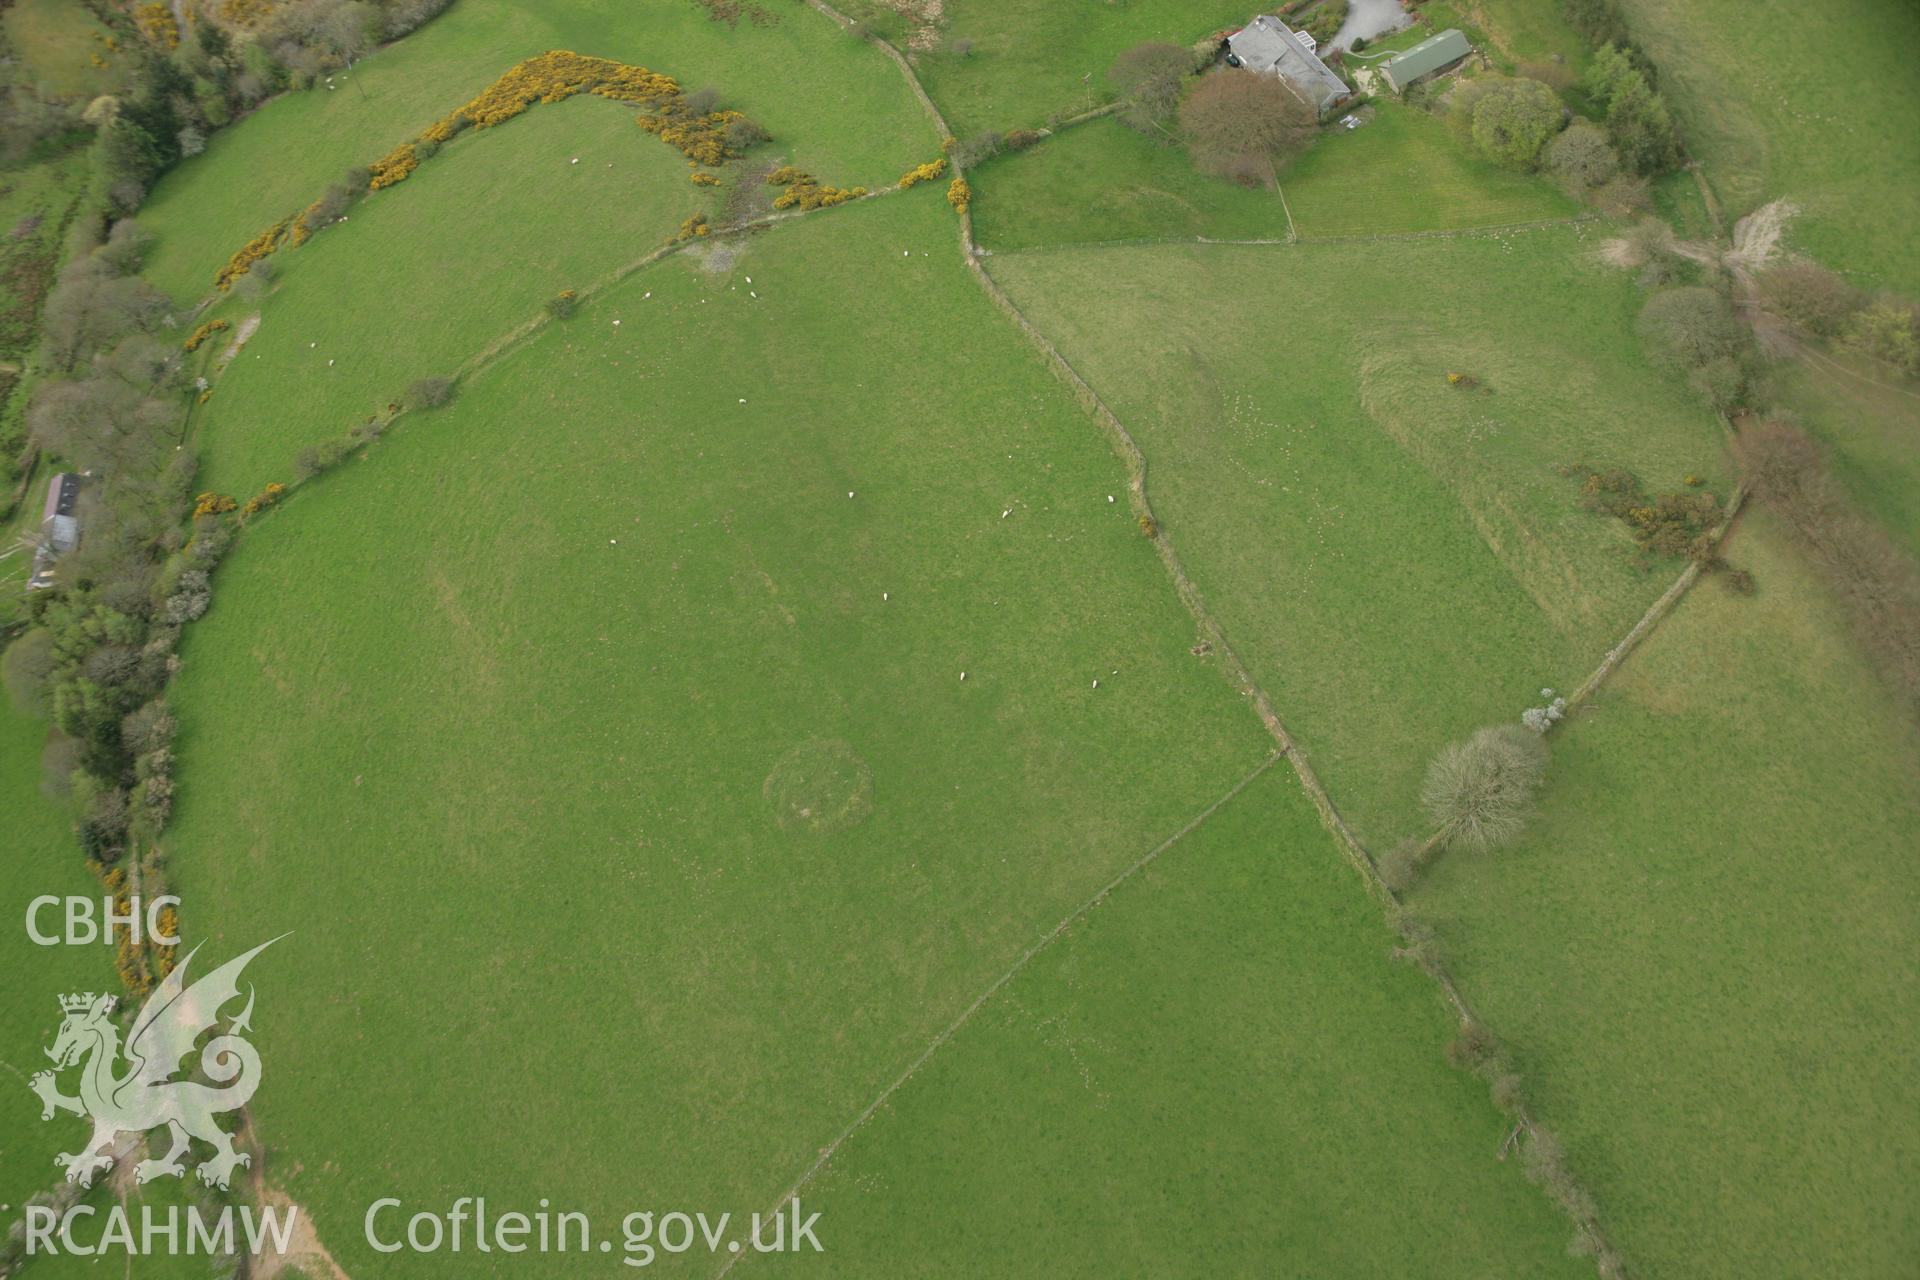 RCAHMW colour oblique aerial photograph of Pant Camddwr Cairn, viewed from the north-east. Taken on 17 April 2007 by Toby Driver